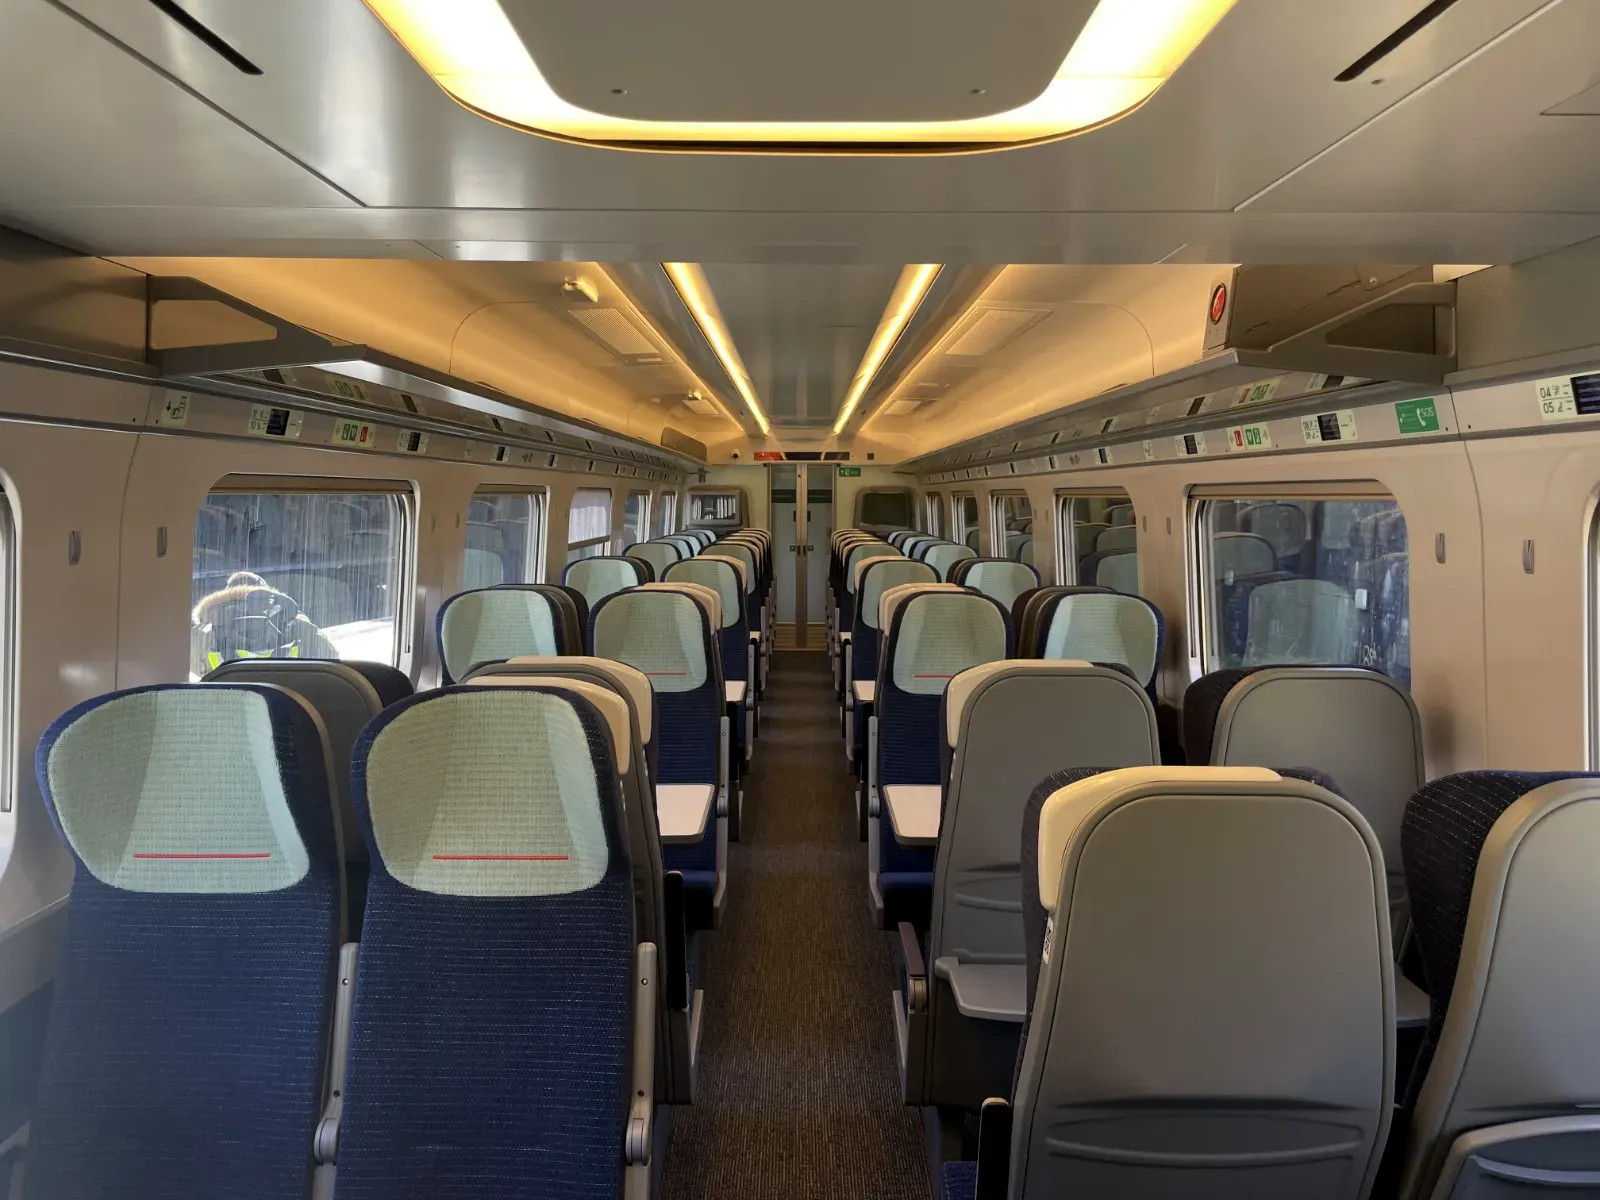 The interior of Avanti's class 805 with rows of modern seating and dark blue upholstery with light blue head rests. There are overhead luggage racks and large windows on both sides. There are white grab handles along the edges of the seats.